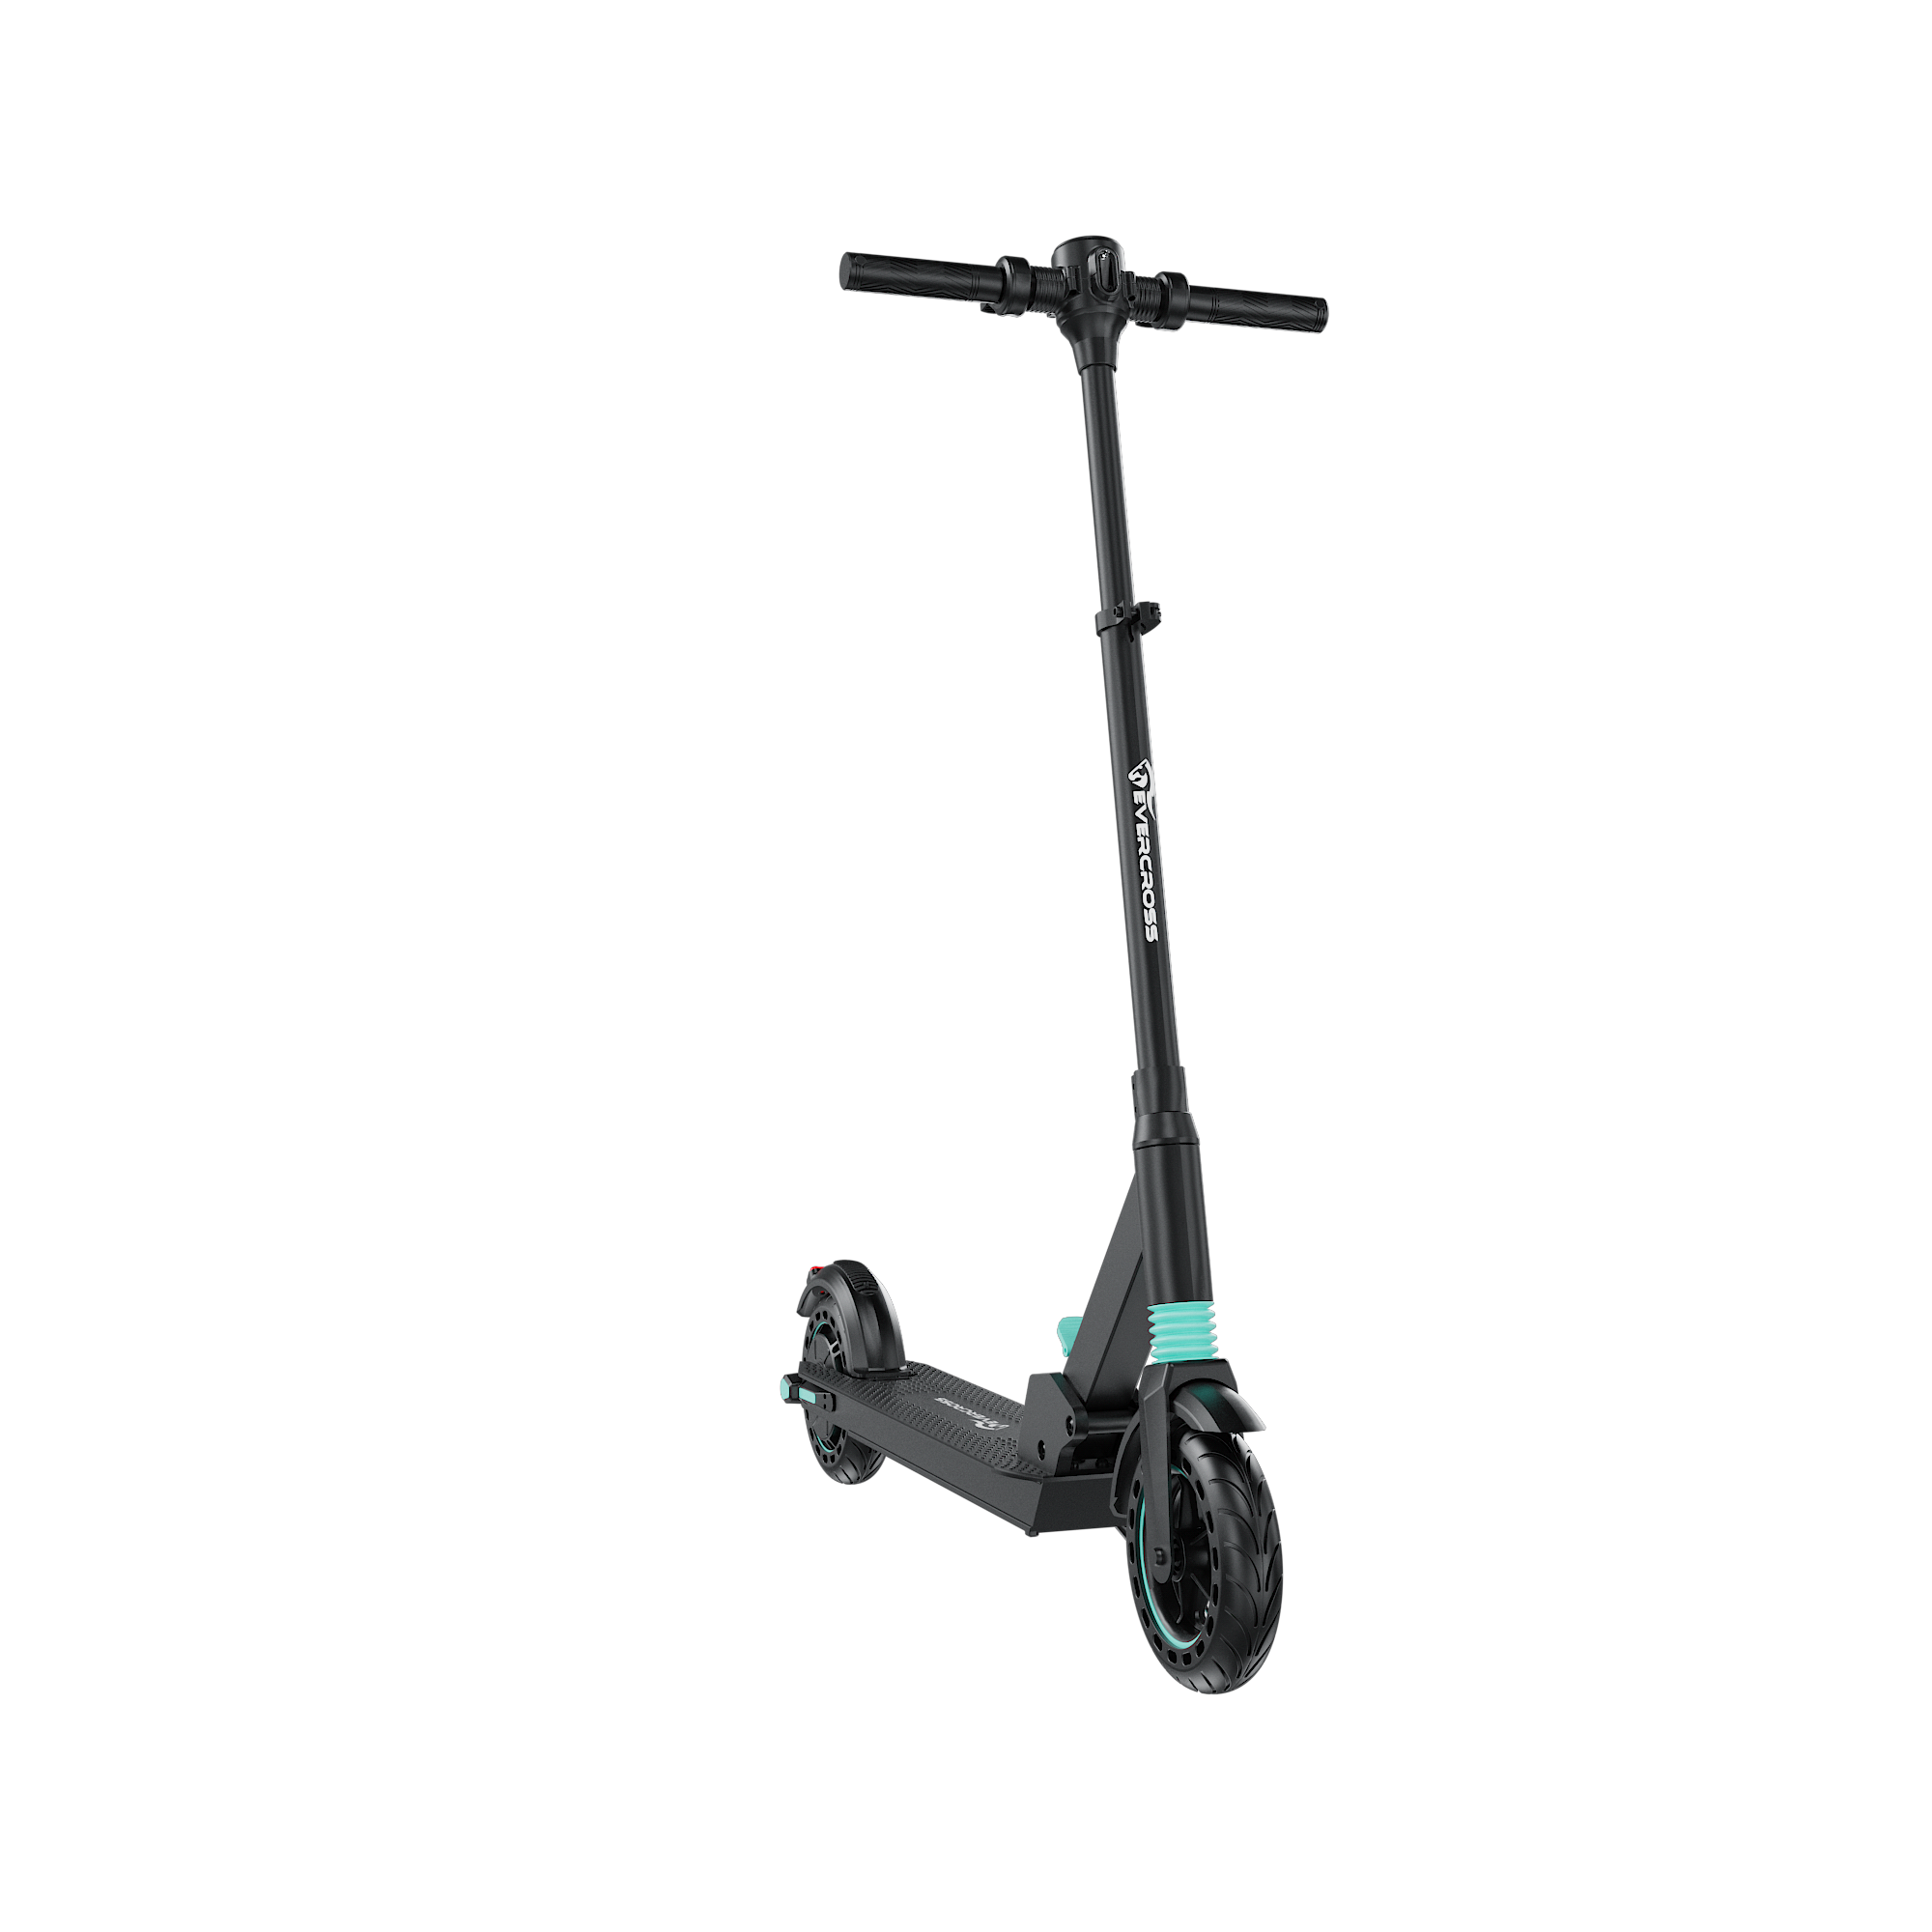 EVERCROSS E8 Electric Scooter - 8 Tires, 350W Motor up to 15 MPH & 12  Miles, 3 Speed Modes Foldable Commuter Electric Scooter 